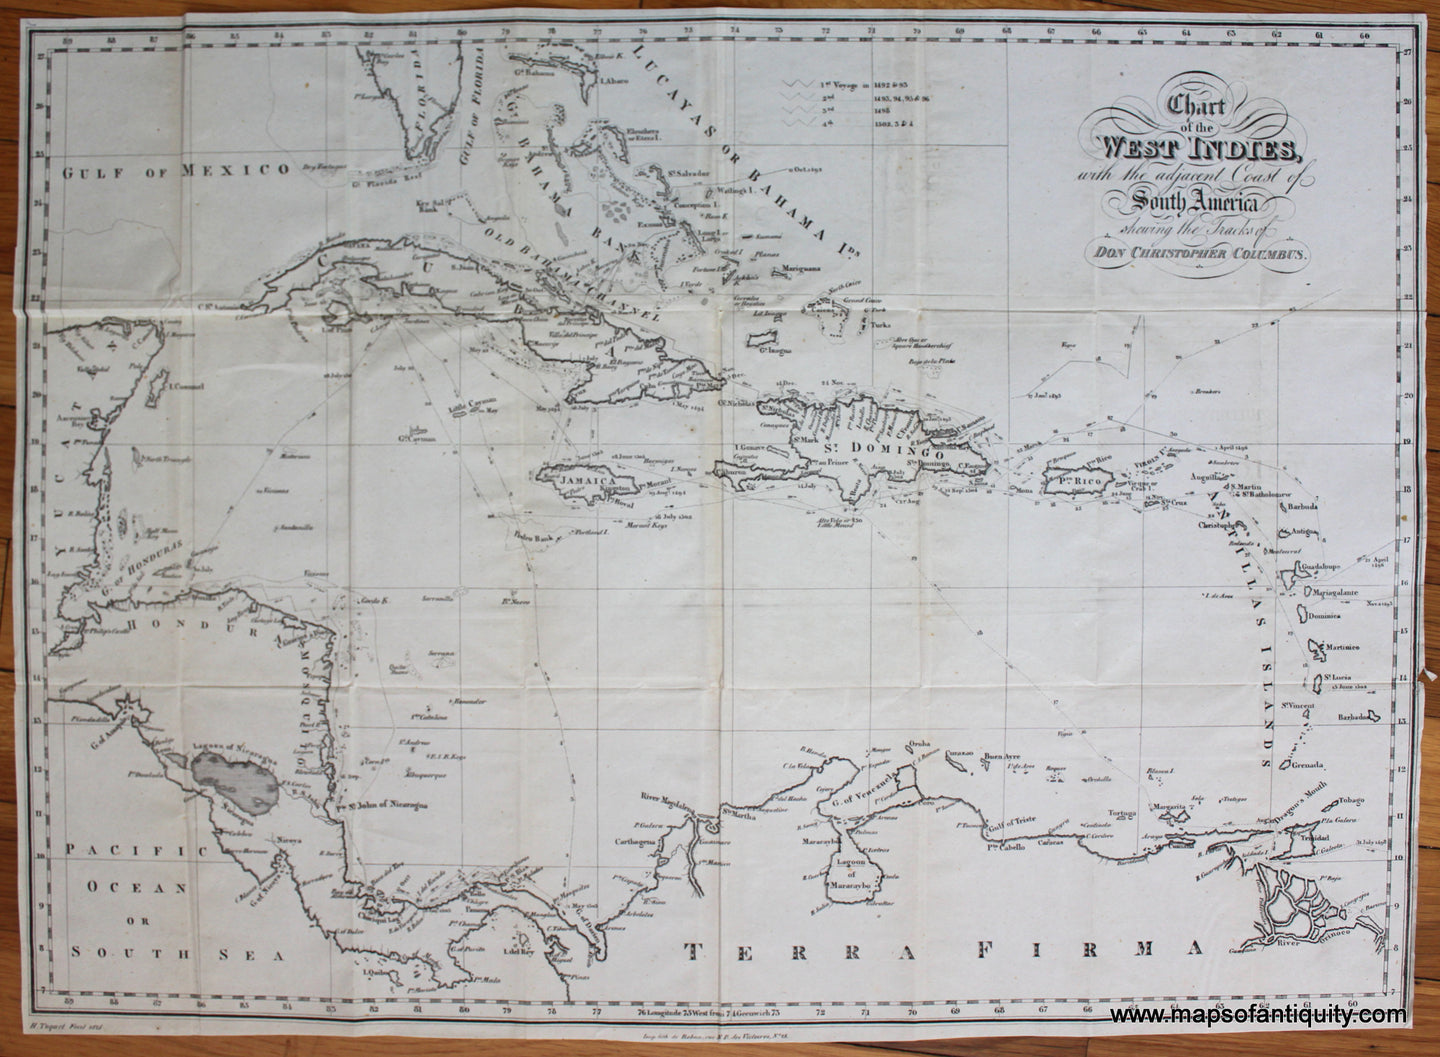 Antique-Map-Chart-West-Indies-Caribbean-History-Christopher-Columbus-1828-Washington-Irving-1800s-19th-century